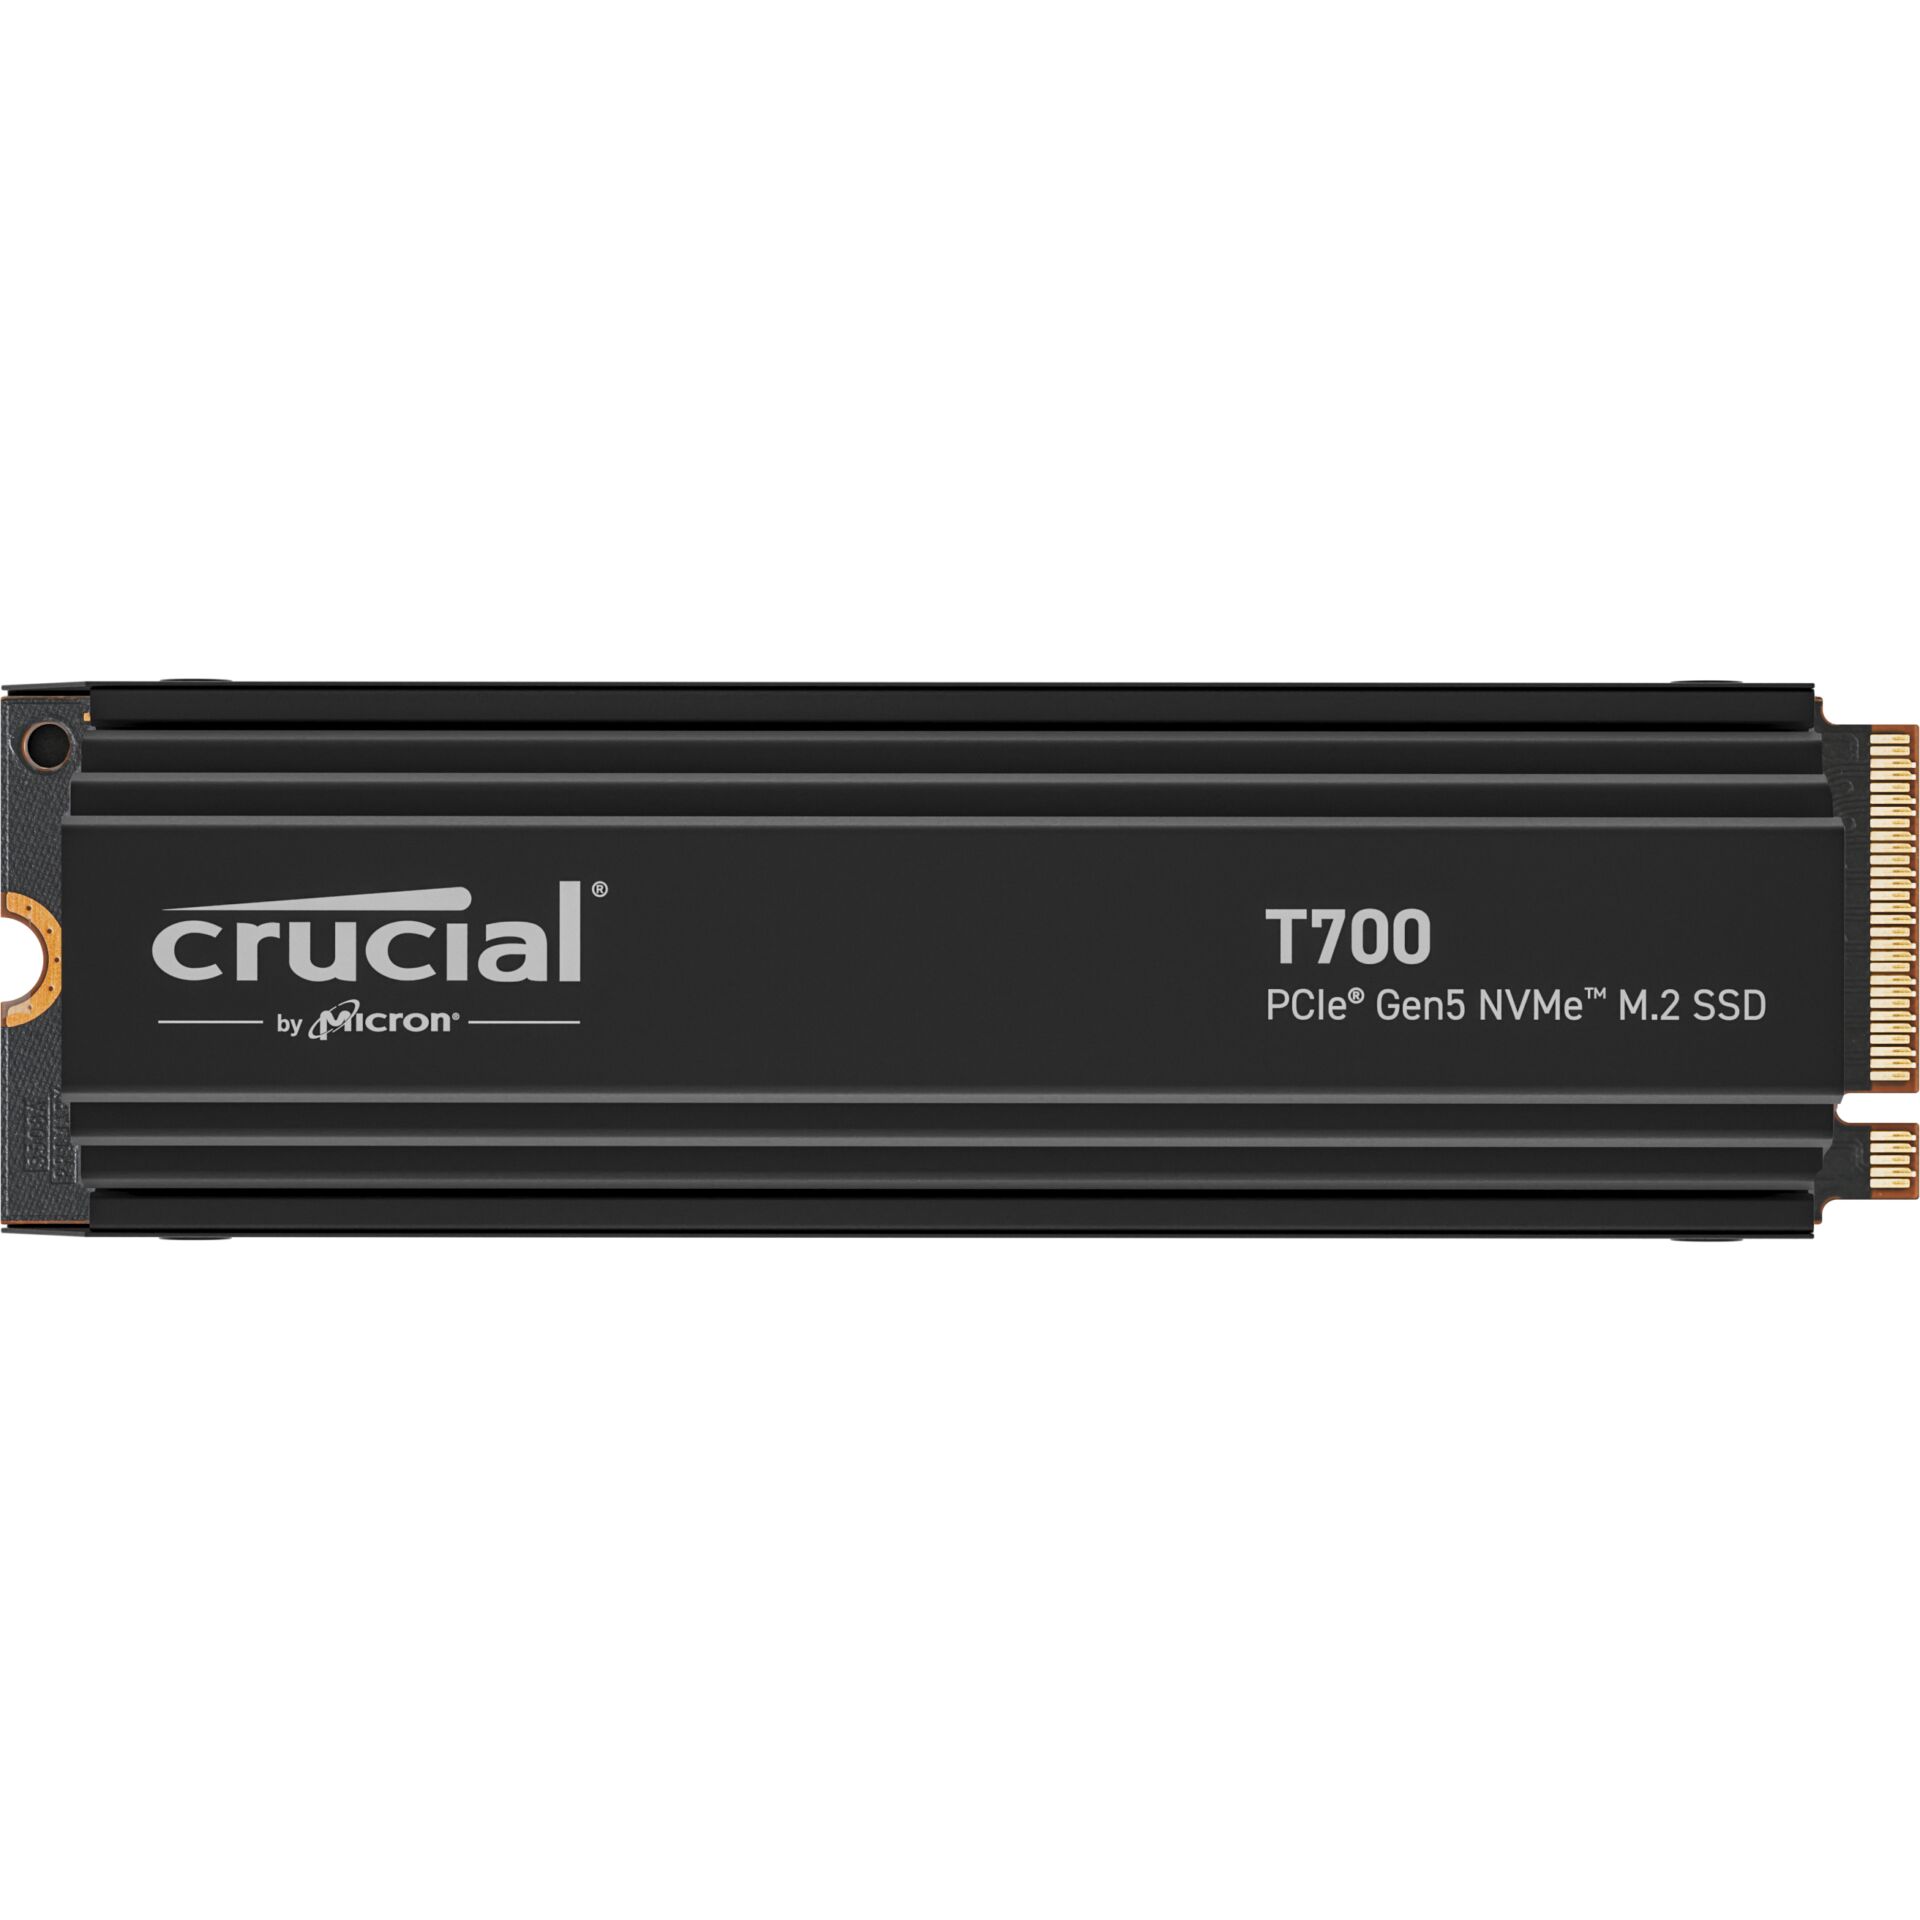 2.0 TB SSD Crucial T700 SSD, M.2/M-Key (PCIe 5.0 x4), lesen: 12400MB/s, schreiben: 11800MB/s SLC-Cached, TBW: 1.2P